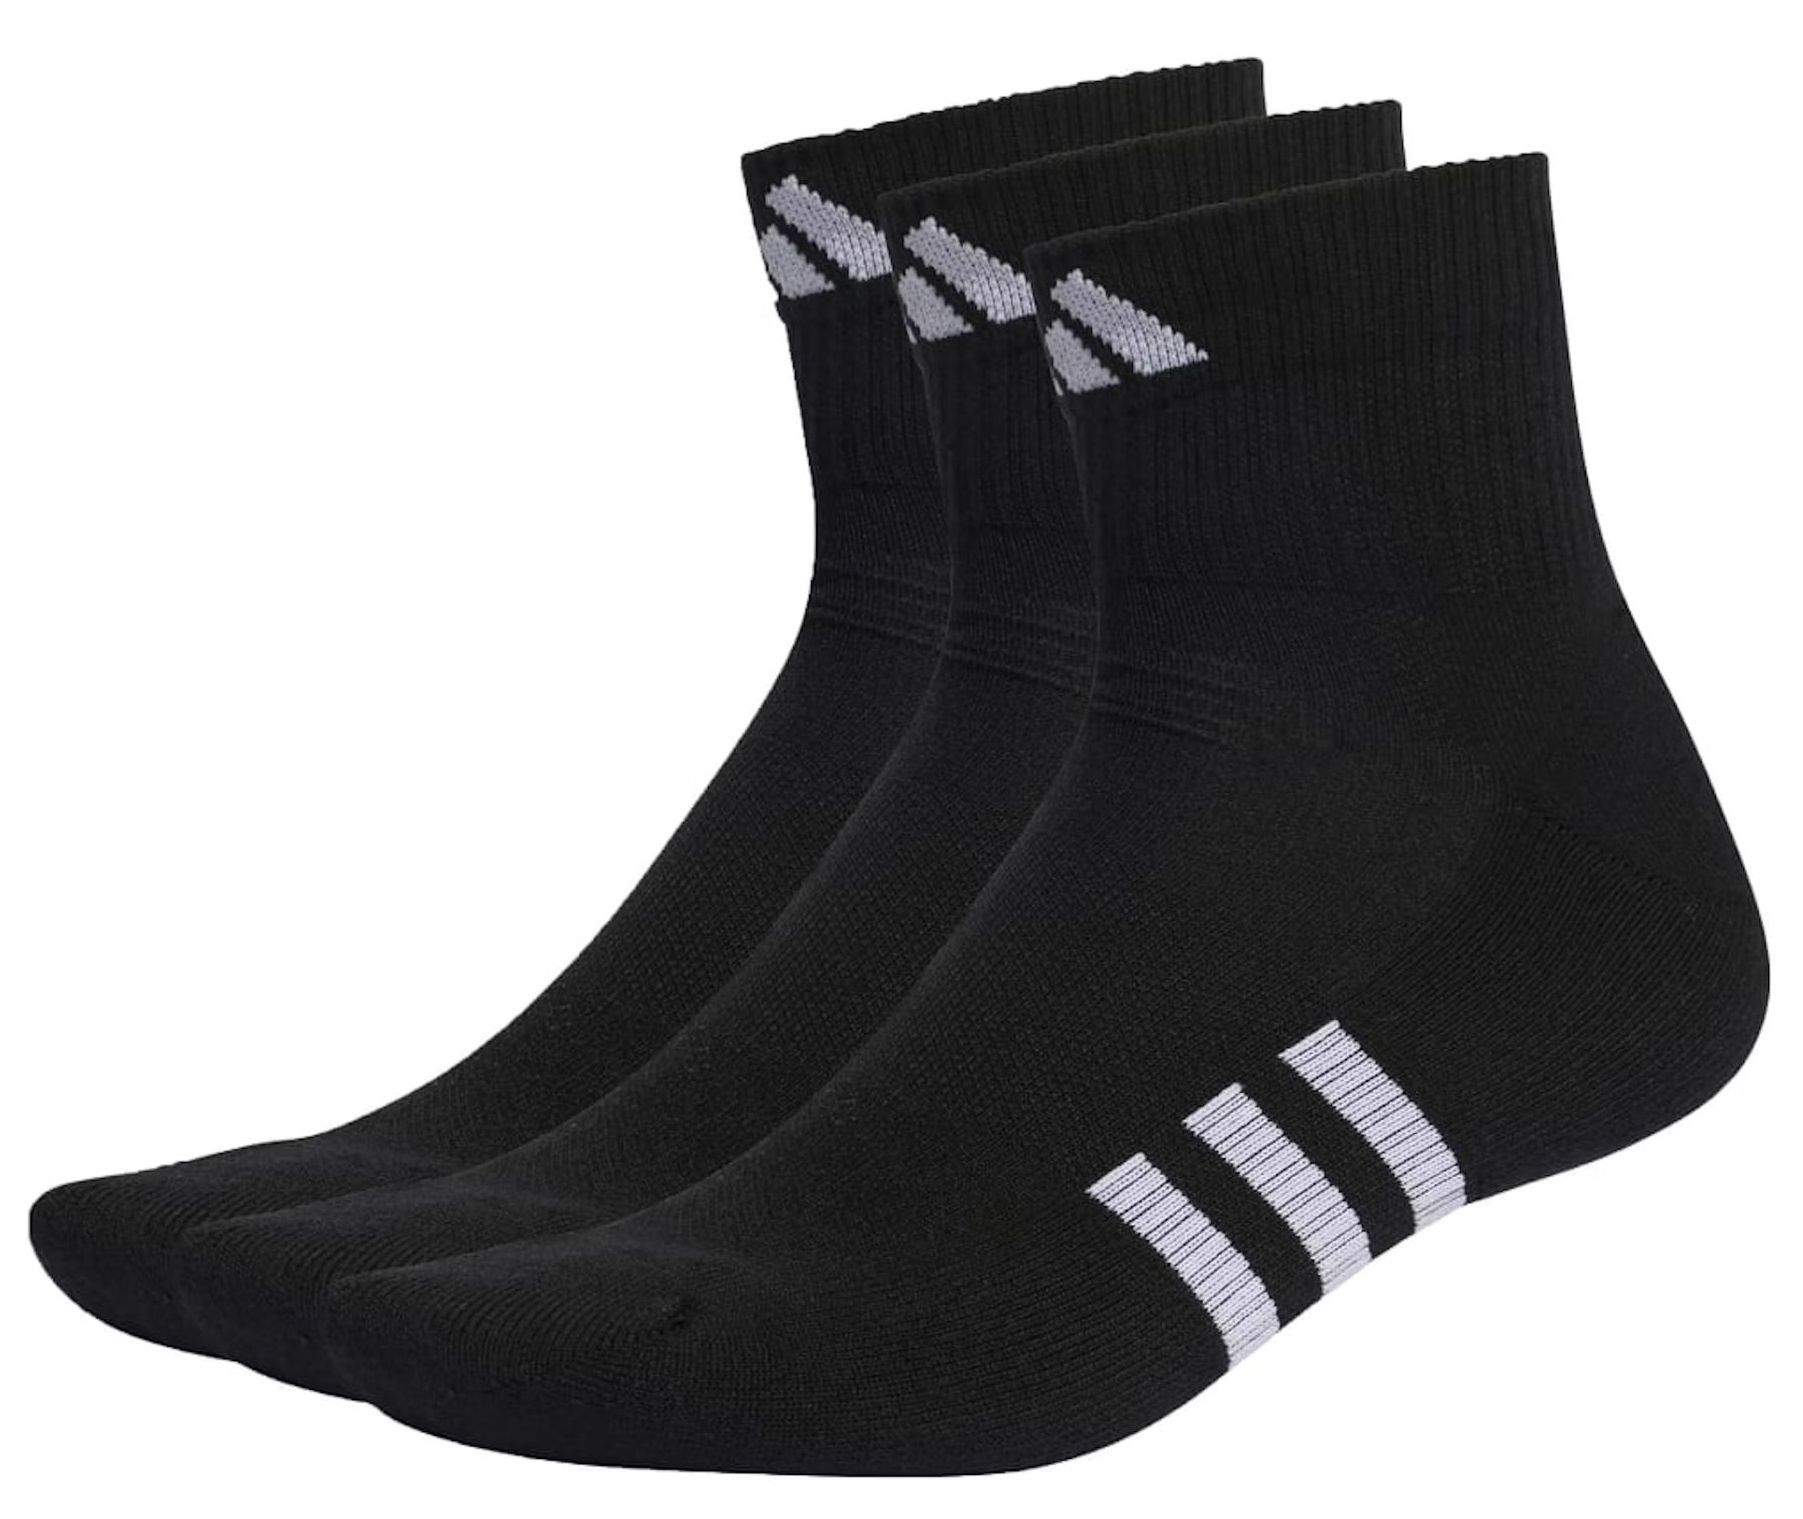 A pair of black adidas socks on a white background